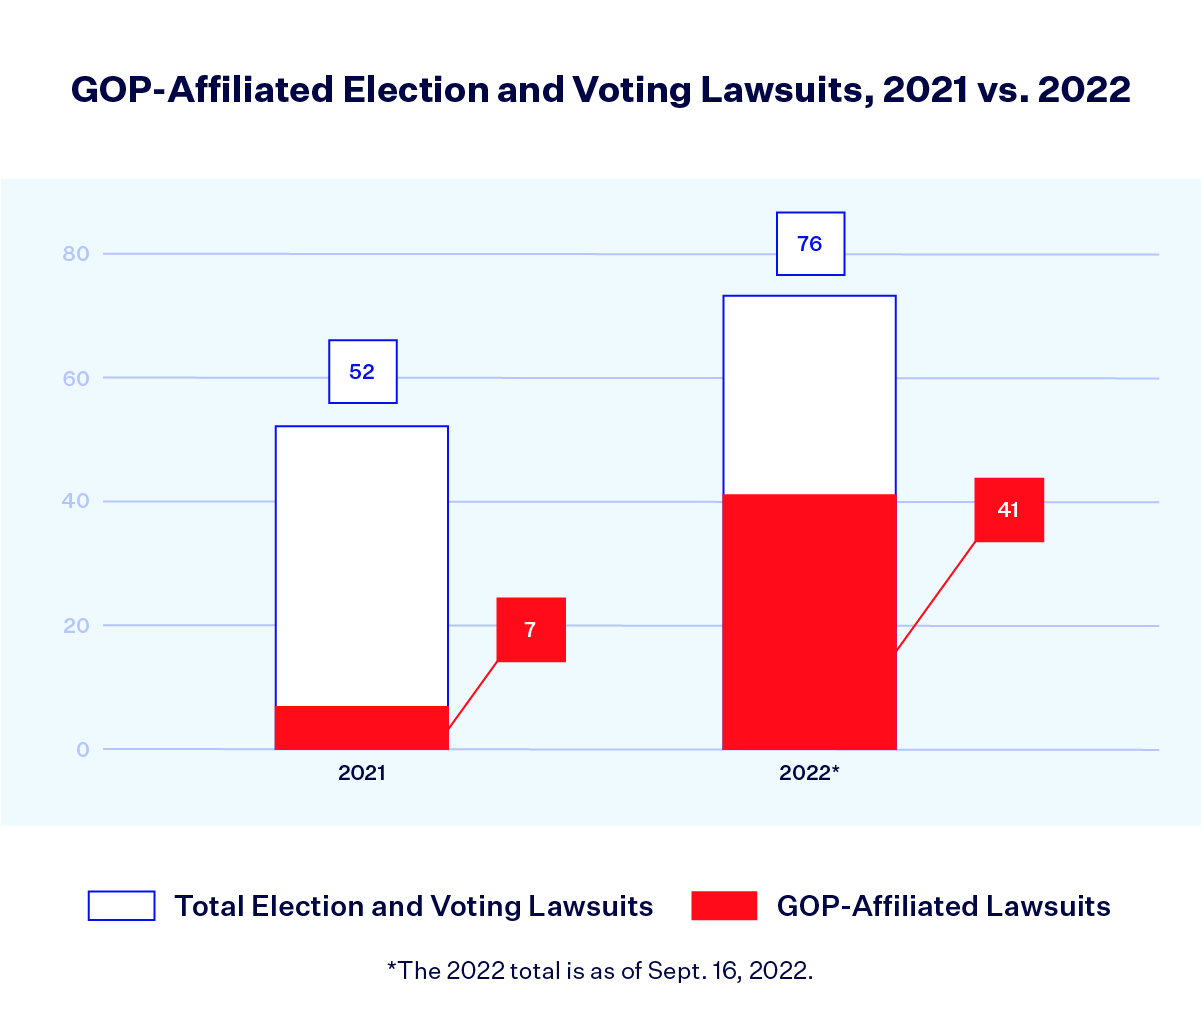 Bar graph titled "GOP-Affiliated Election and Voting Lawsuits, 2021 vs. 2022." The 2021 bar shows 52 Total Election and Voting Lawsuits, with a small, bright red section of that bar representing 7 GOP-Affiliated Lawsuits. The 2022 bar shows 76 Total Election and Voting Lawsuits with a bright red section over half the length of the full bar representing 41 GOP-Affiliated Lawsuits. A footnote reads "The 2022 total is as of Sept. 16, 2022."